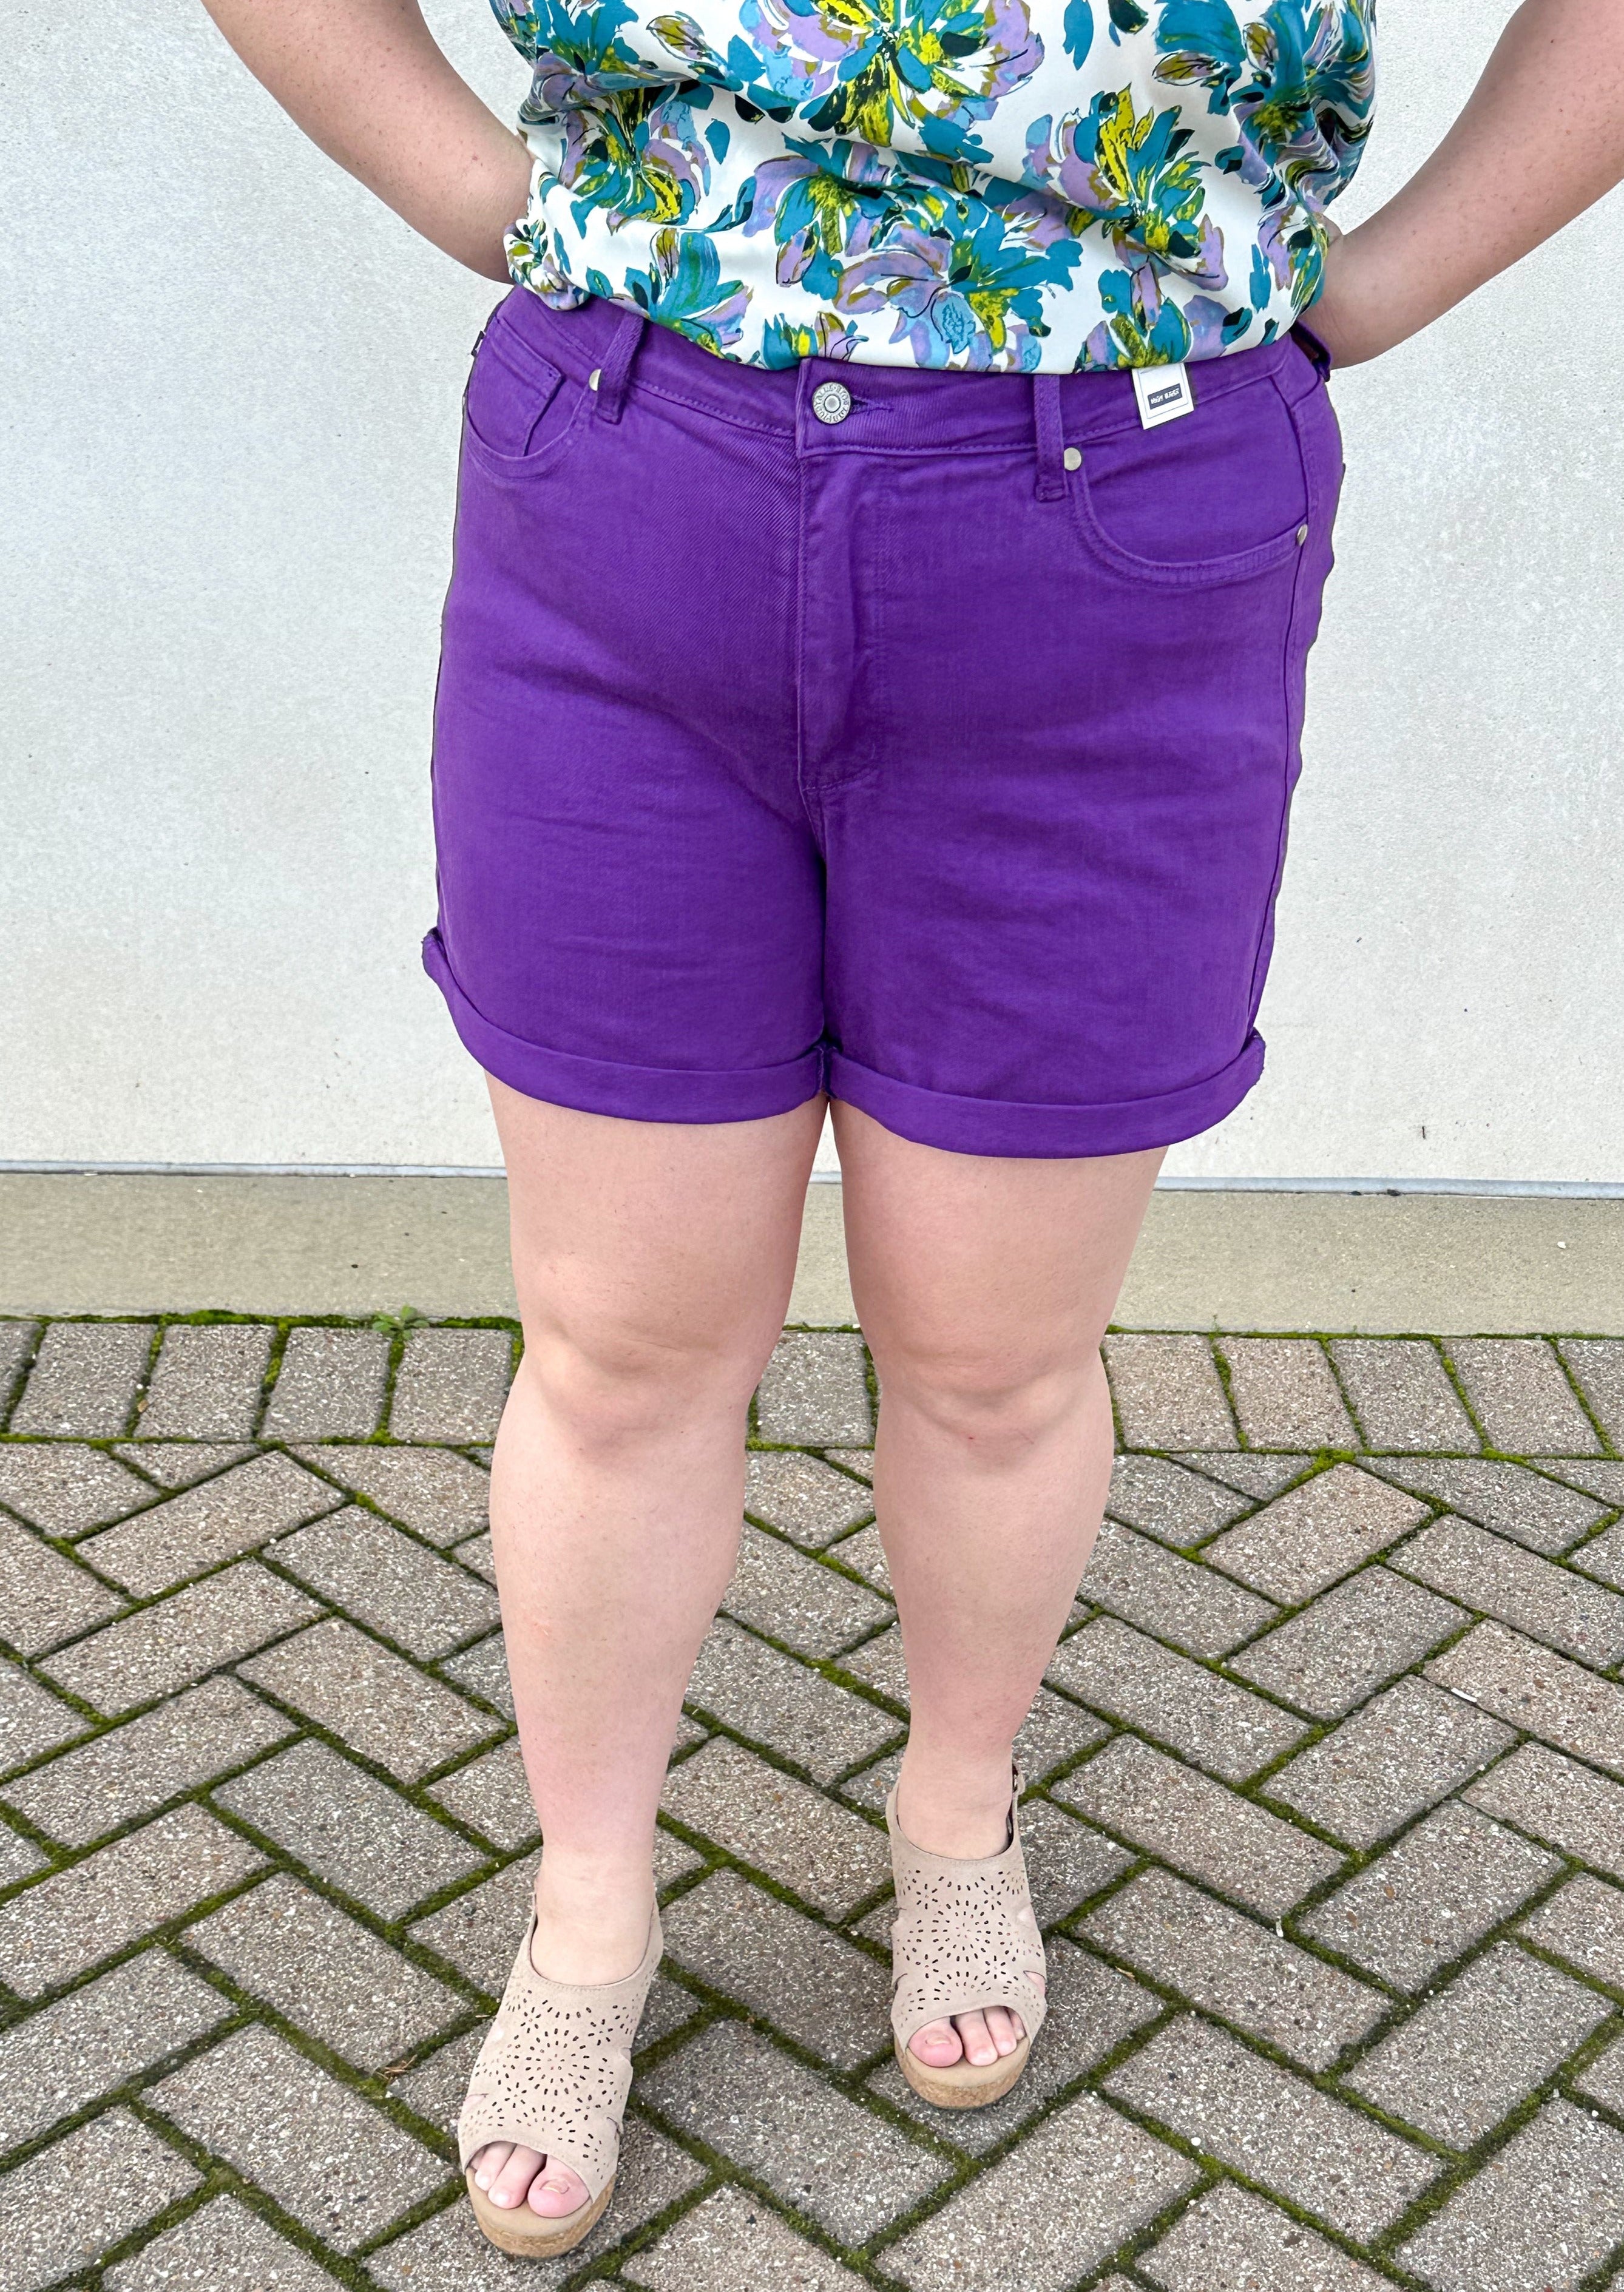 Judy Blue purple jean shorts, front button and zipper closure, belt loops, front and back pockets, cuffed hem